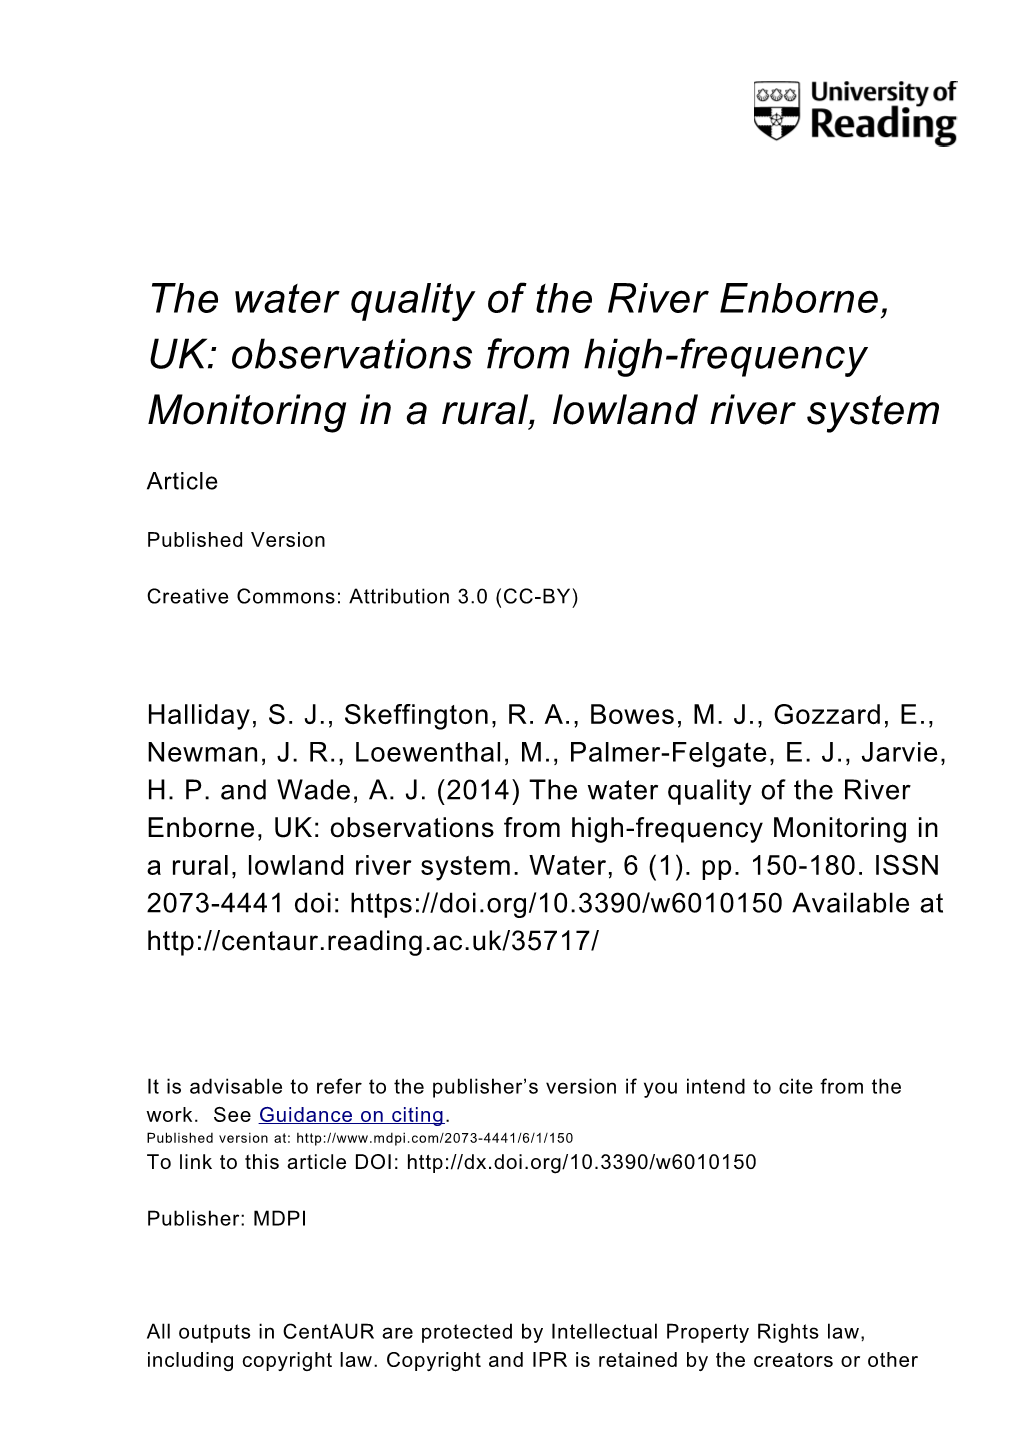 The Water Quality of the River Enborne, UK: Observations from High-Frequency Monitoring in a Rural, Lowland River System